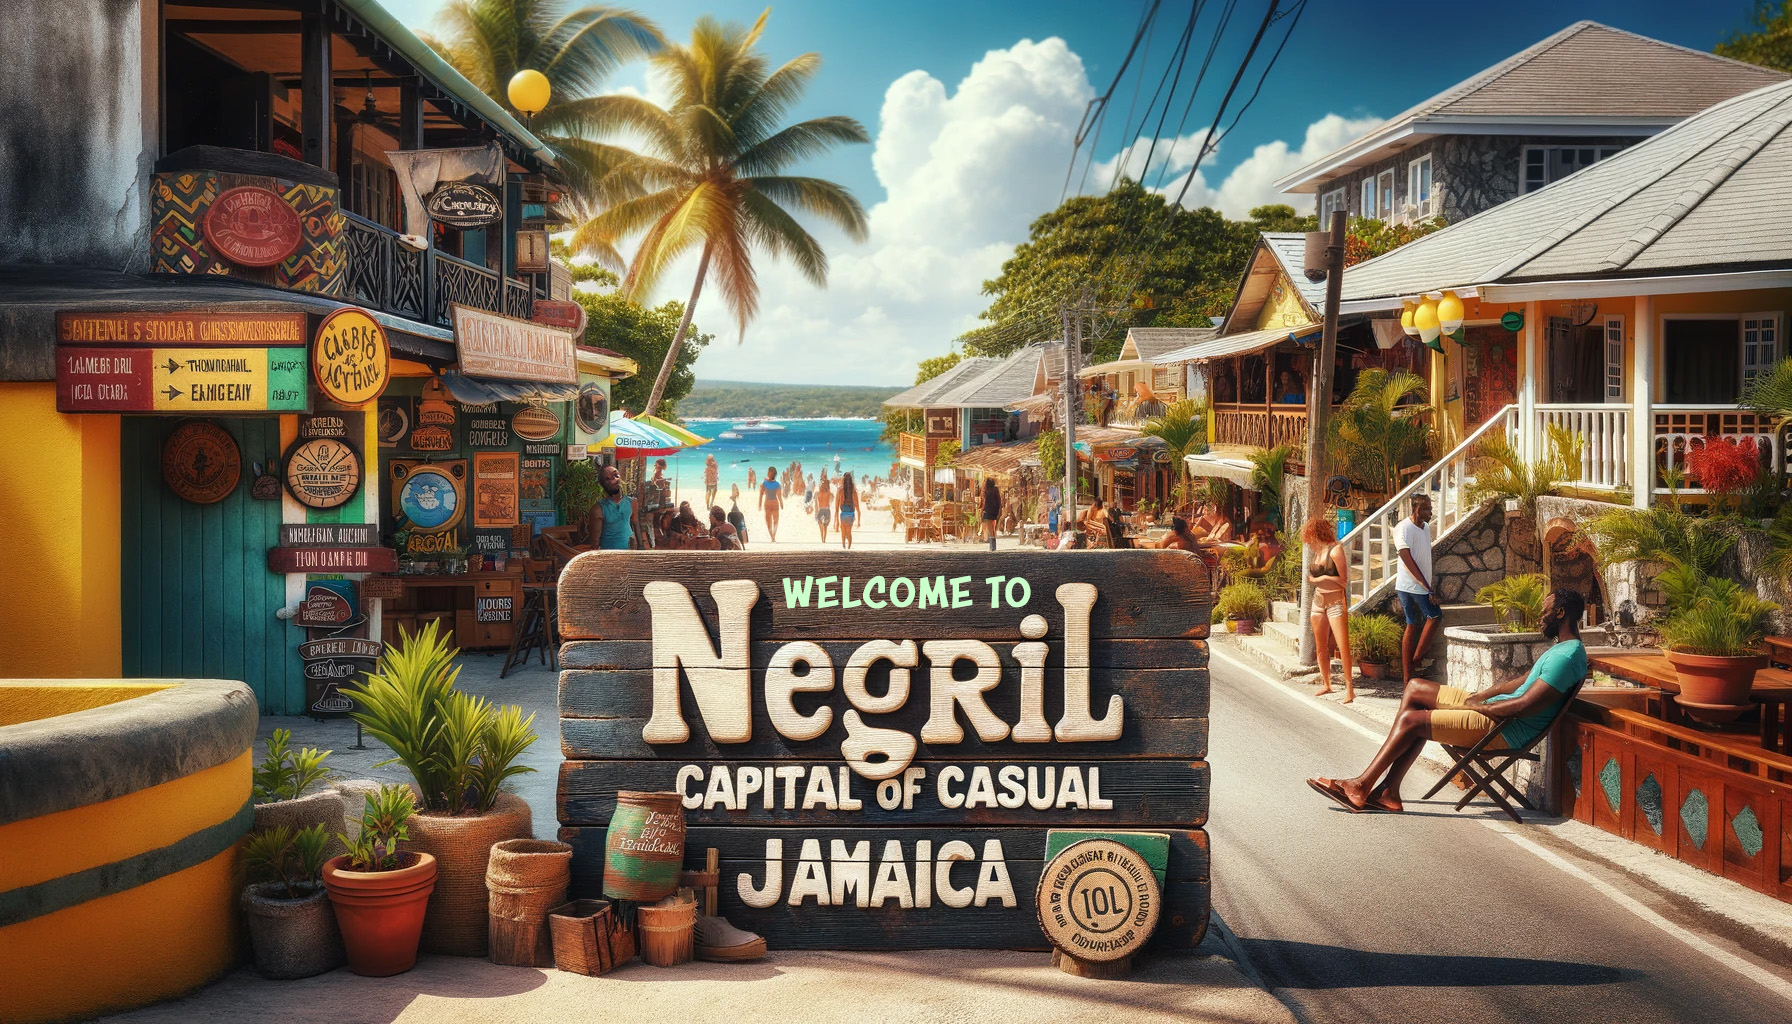 Welcome to Negril Capital of Casual Jamaica